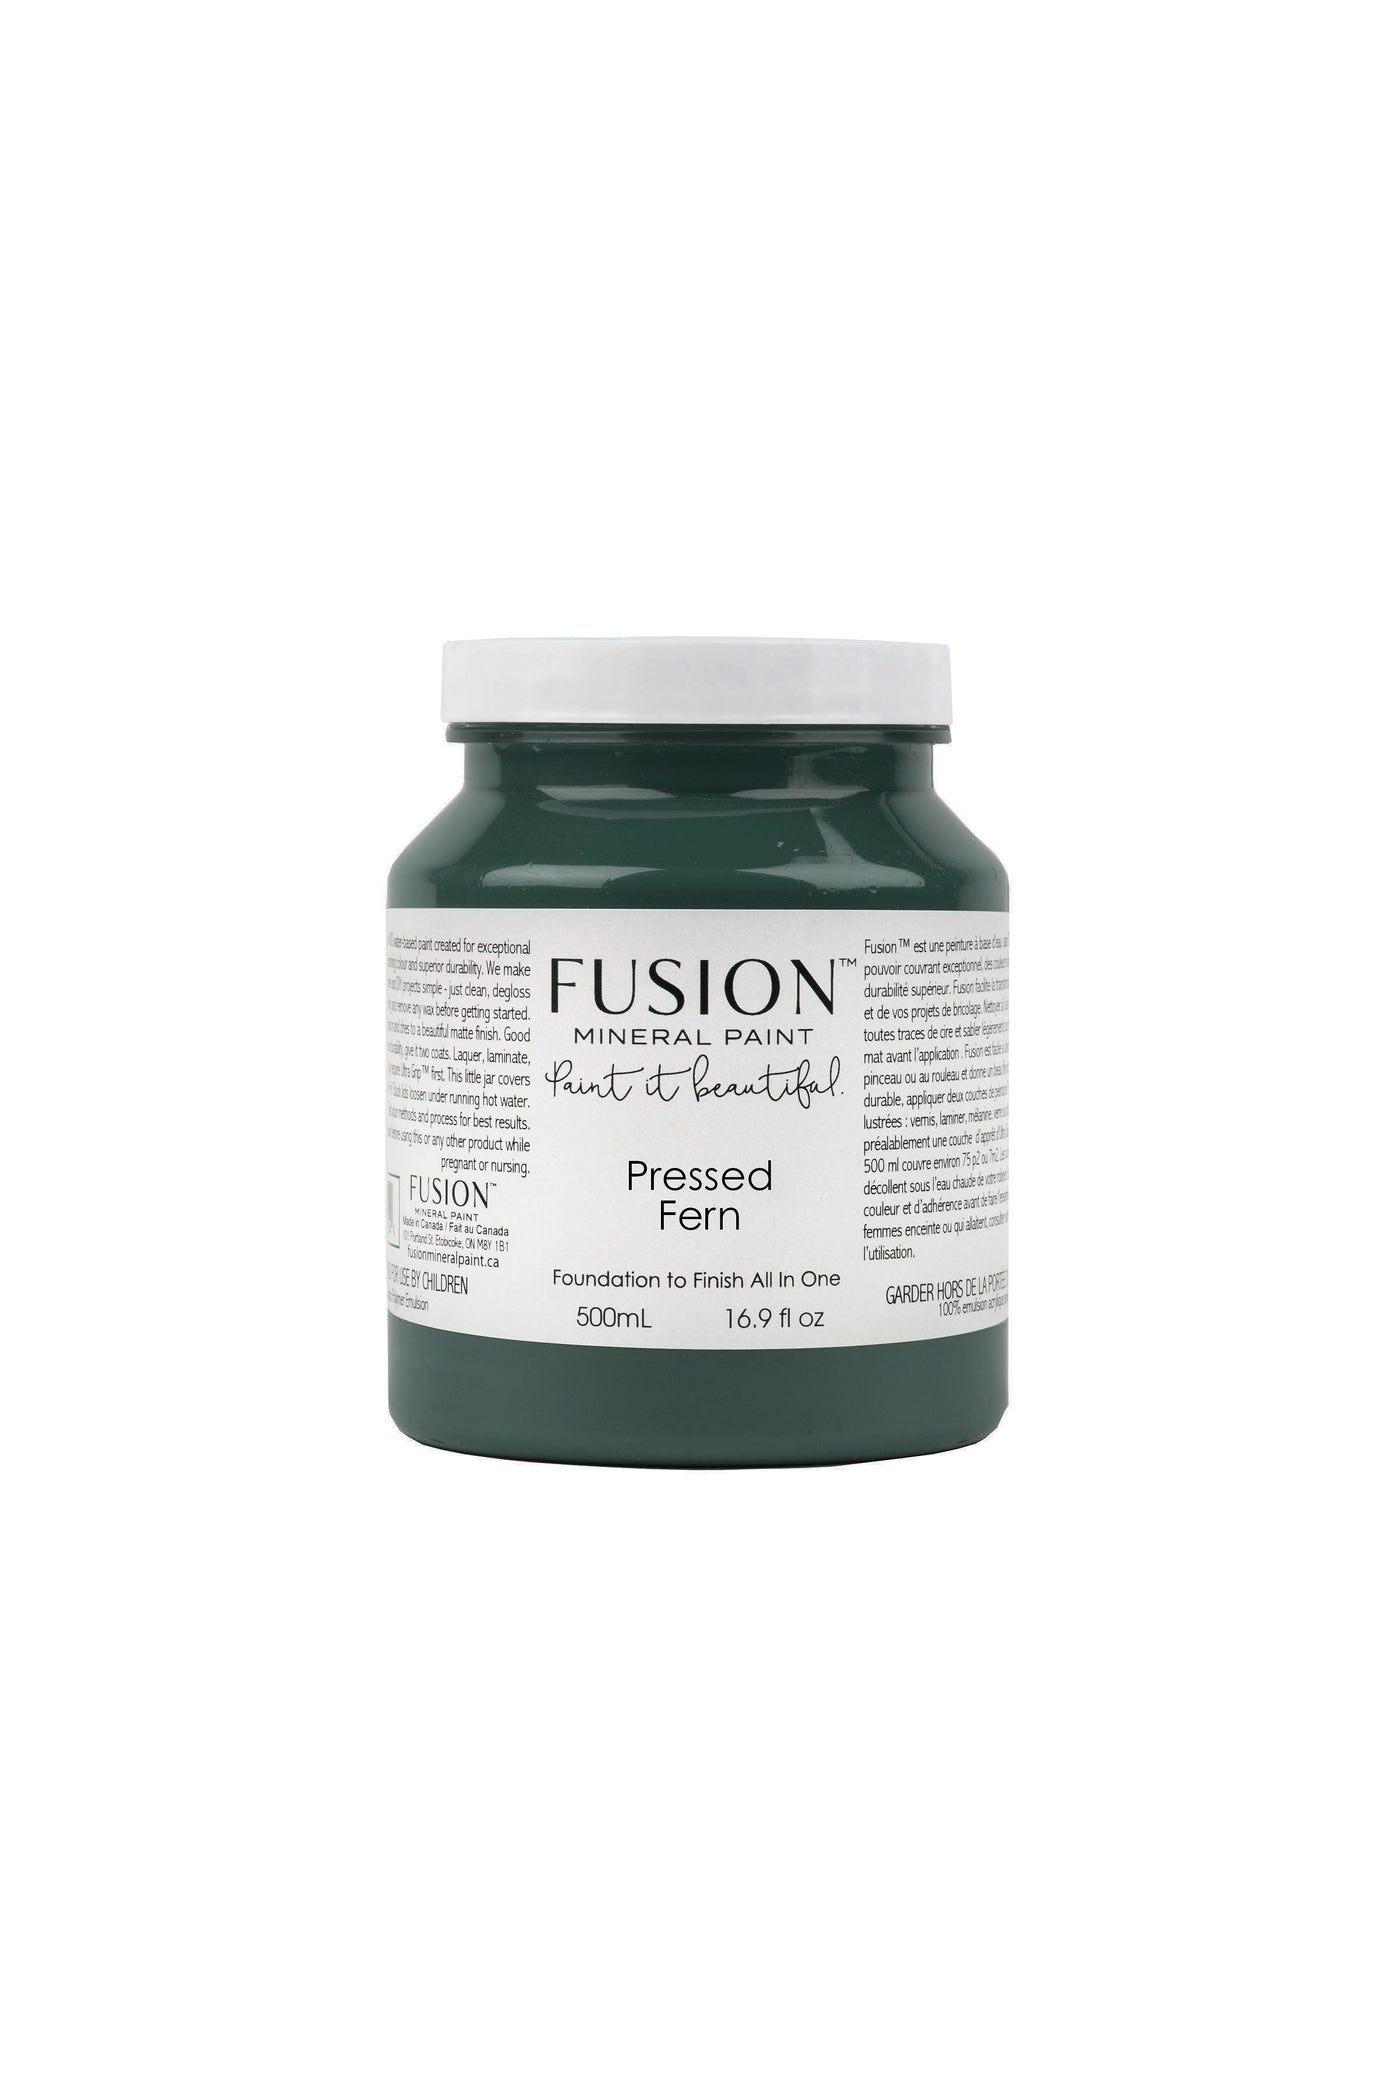 Fusion Mineral Paint - PRESSED FERN nature inspired dark moody green 500ml